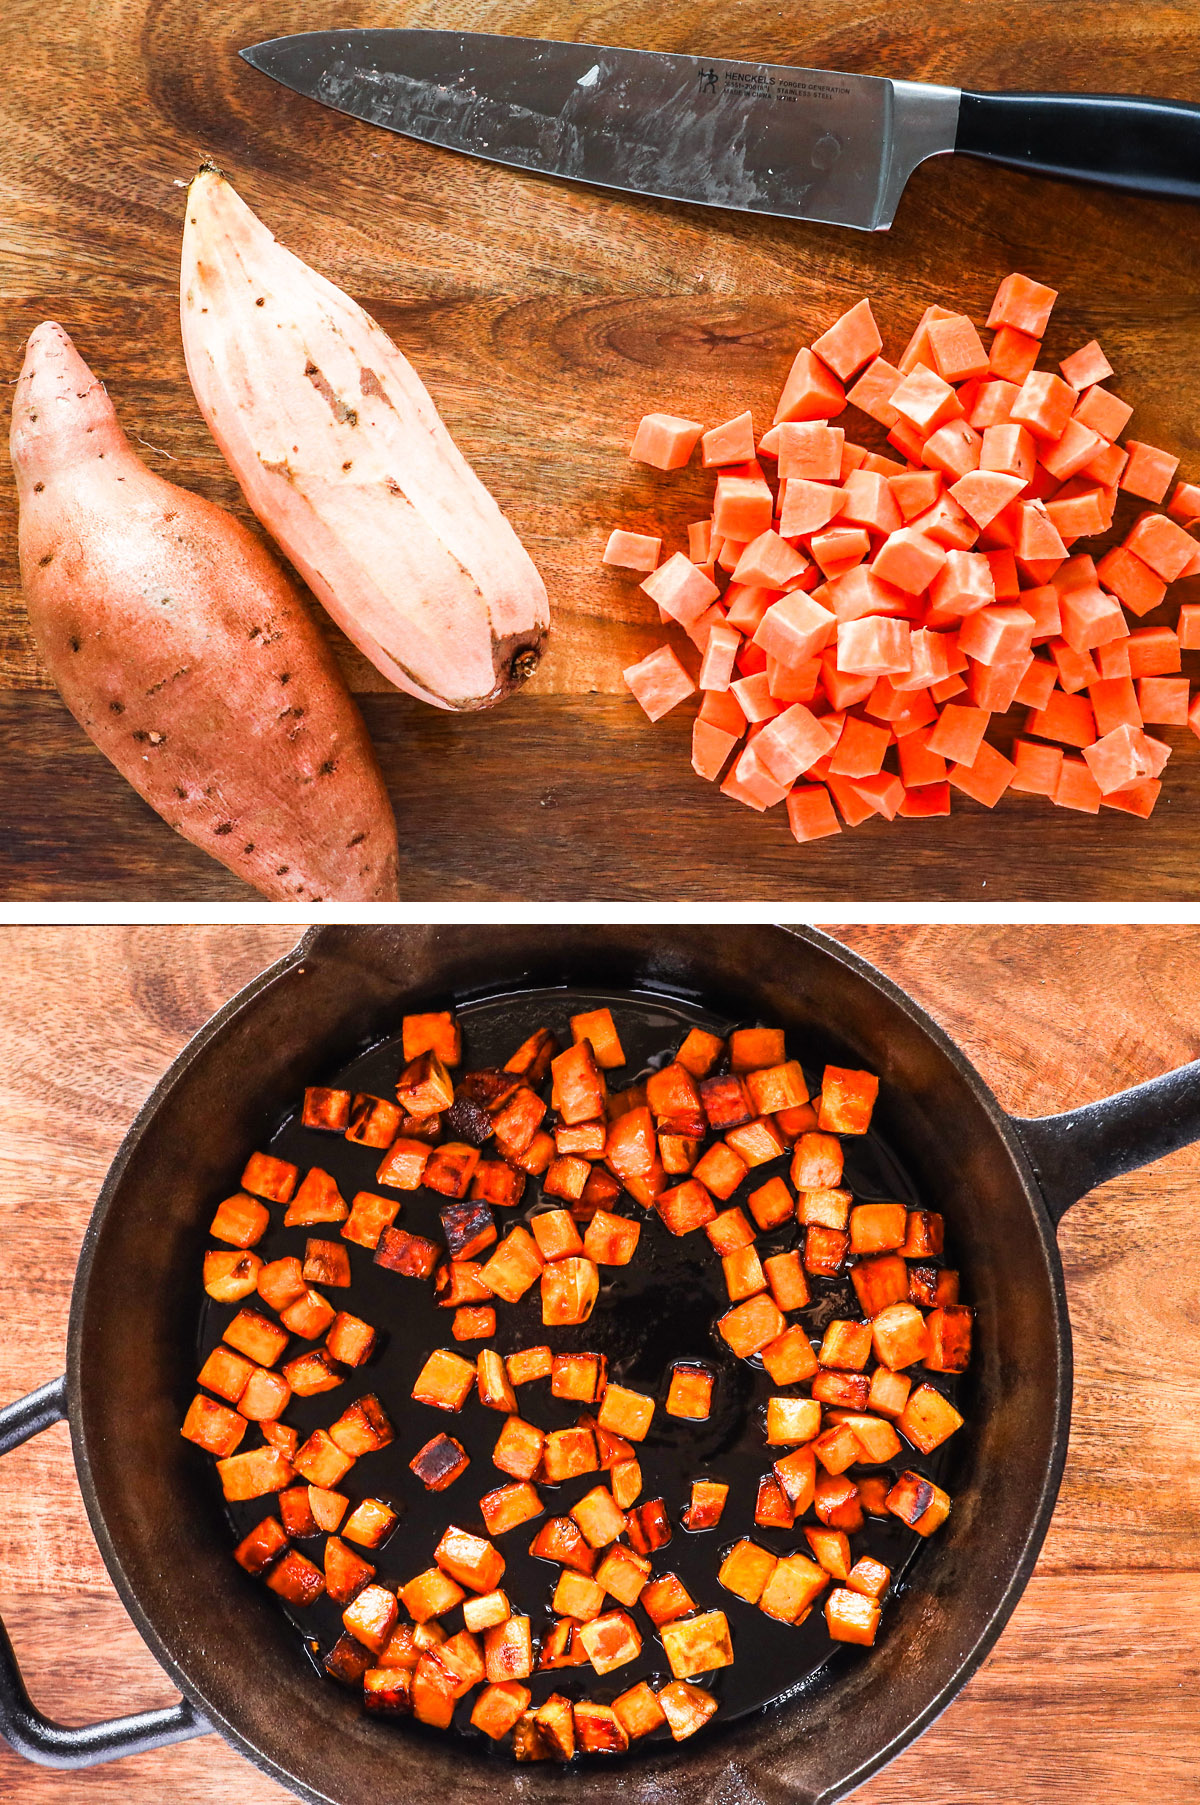 Chopped sweet potato on a cutting board, and cooked cubed sweet potato in a skillet.